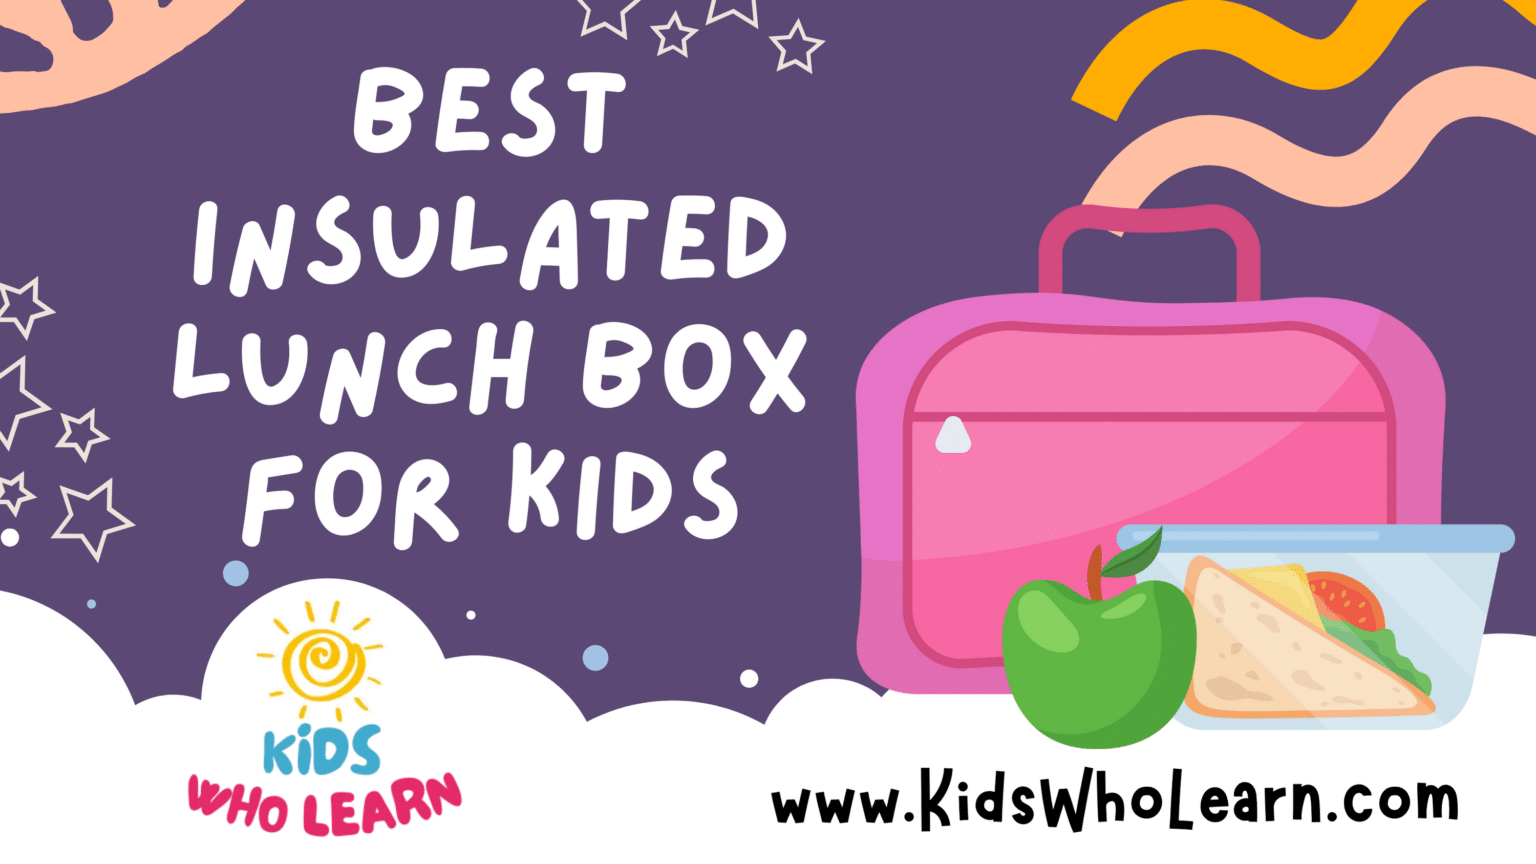 Best Insulated Lunch Box For Kids